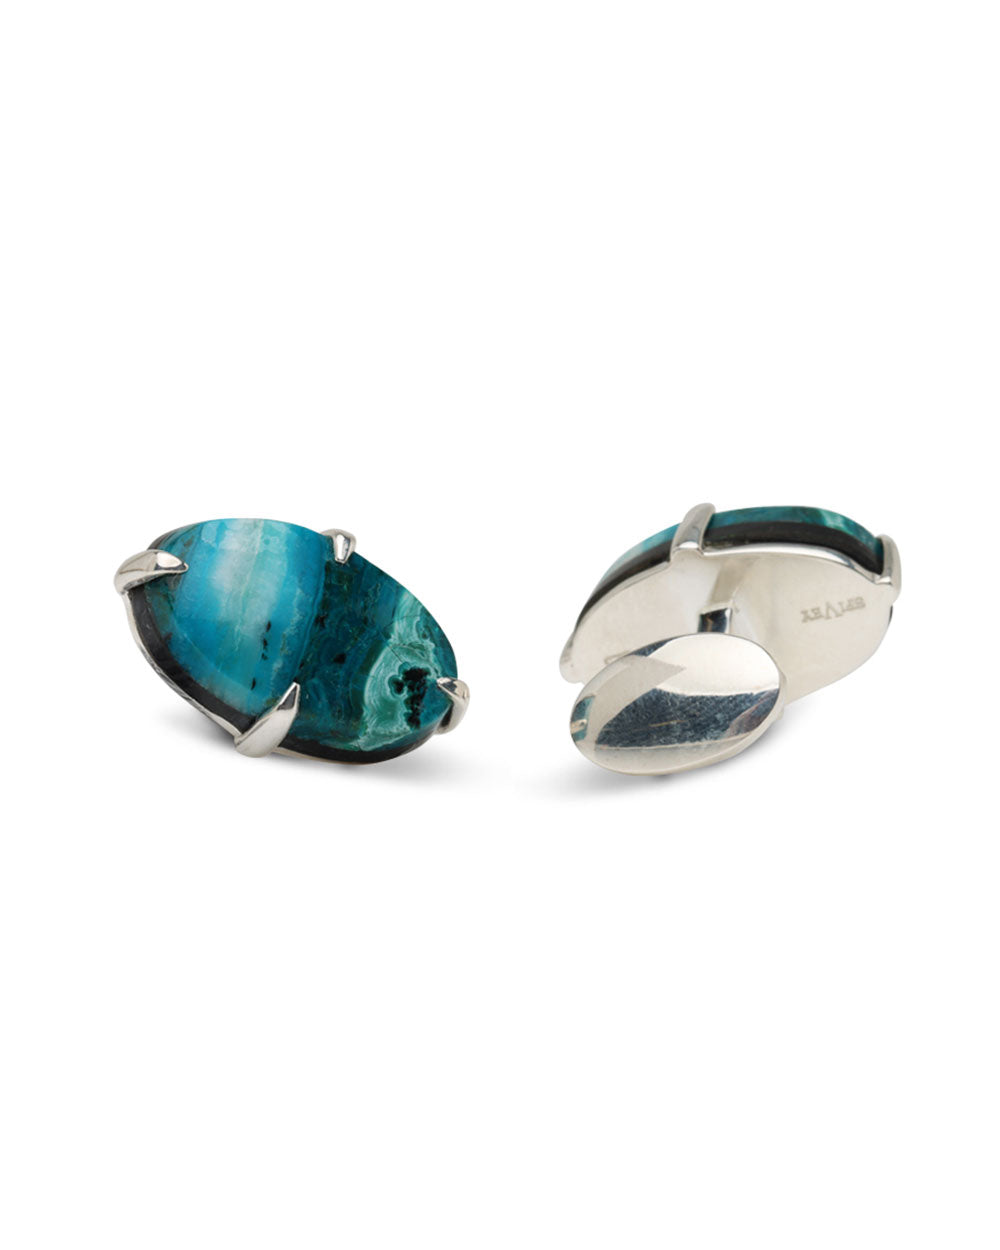 Chrysocolla Cabochon Intuition Oval Cufflinks